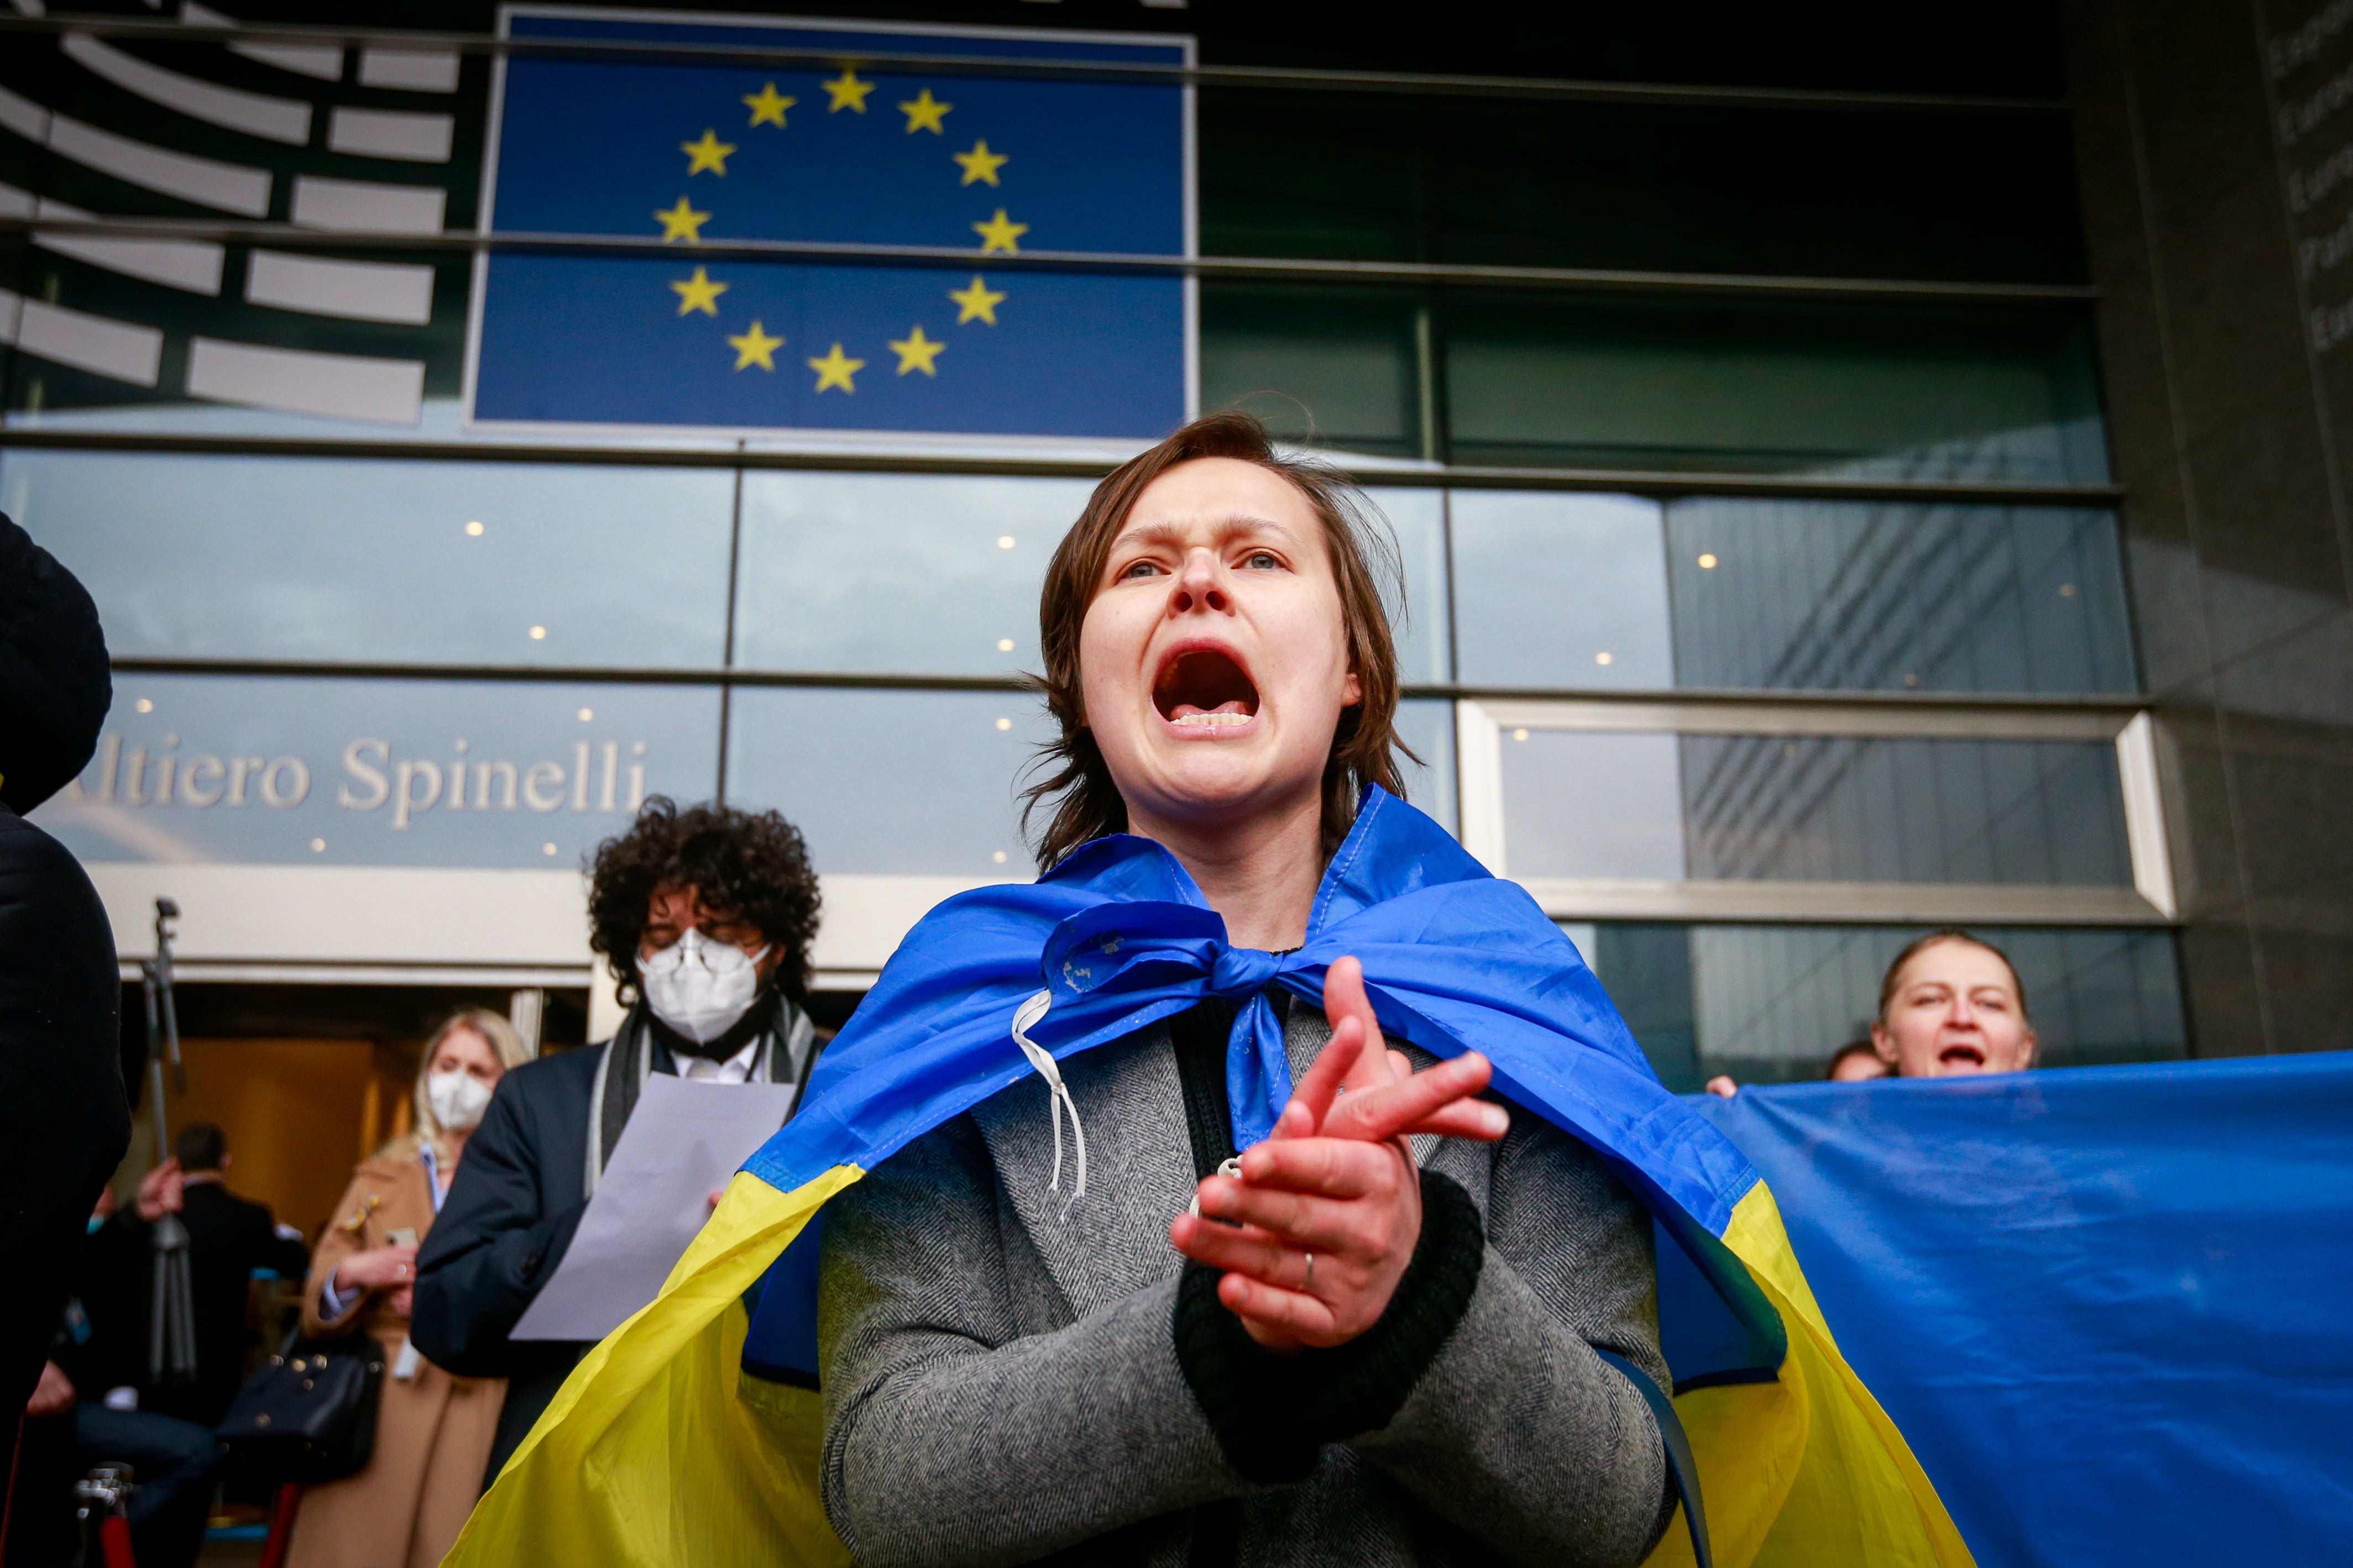 A woman supporting Ukraine outside the European parliament in Brussels on Monday